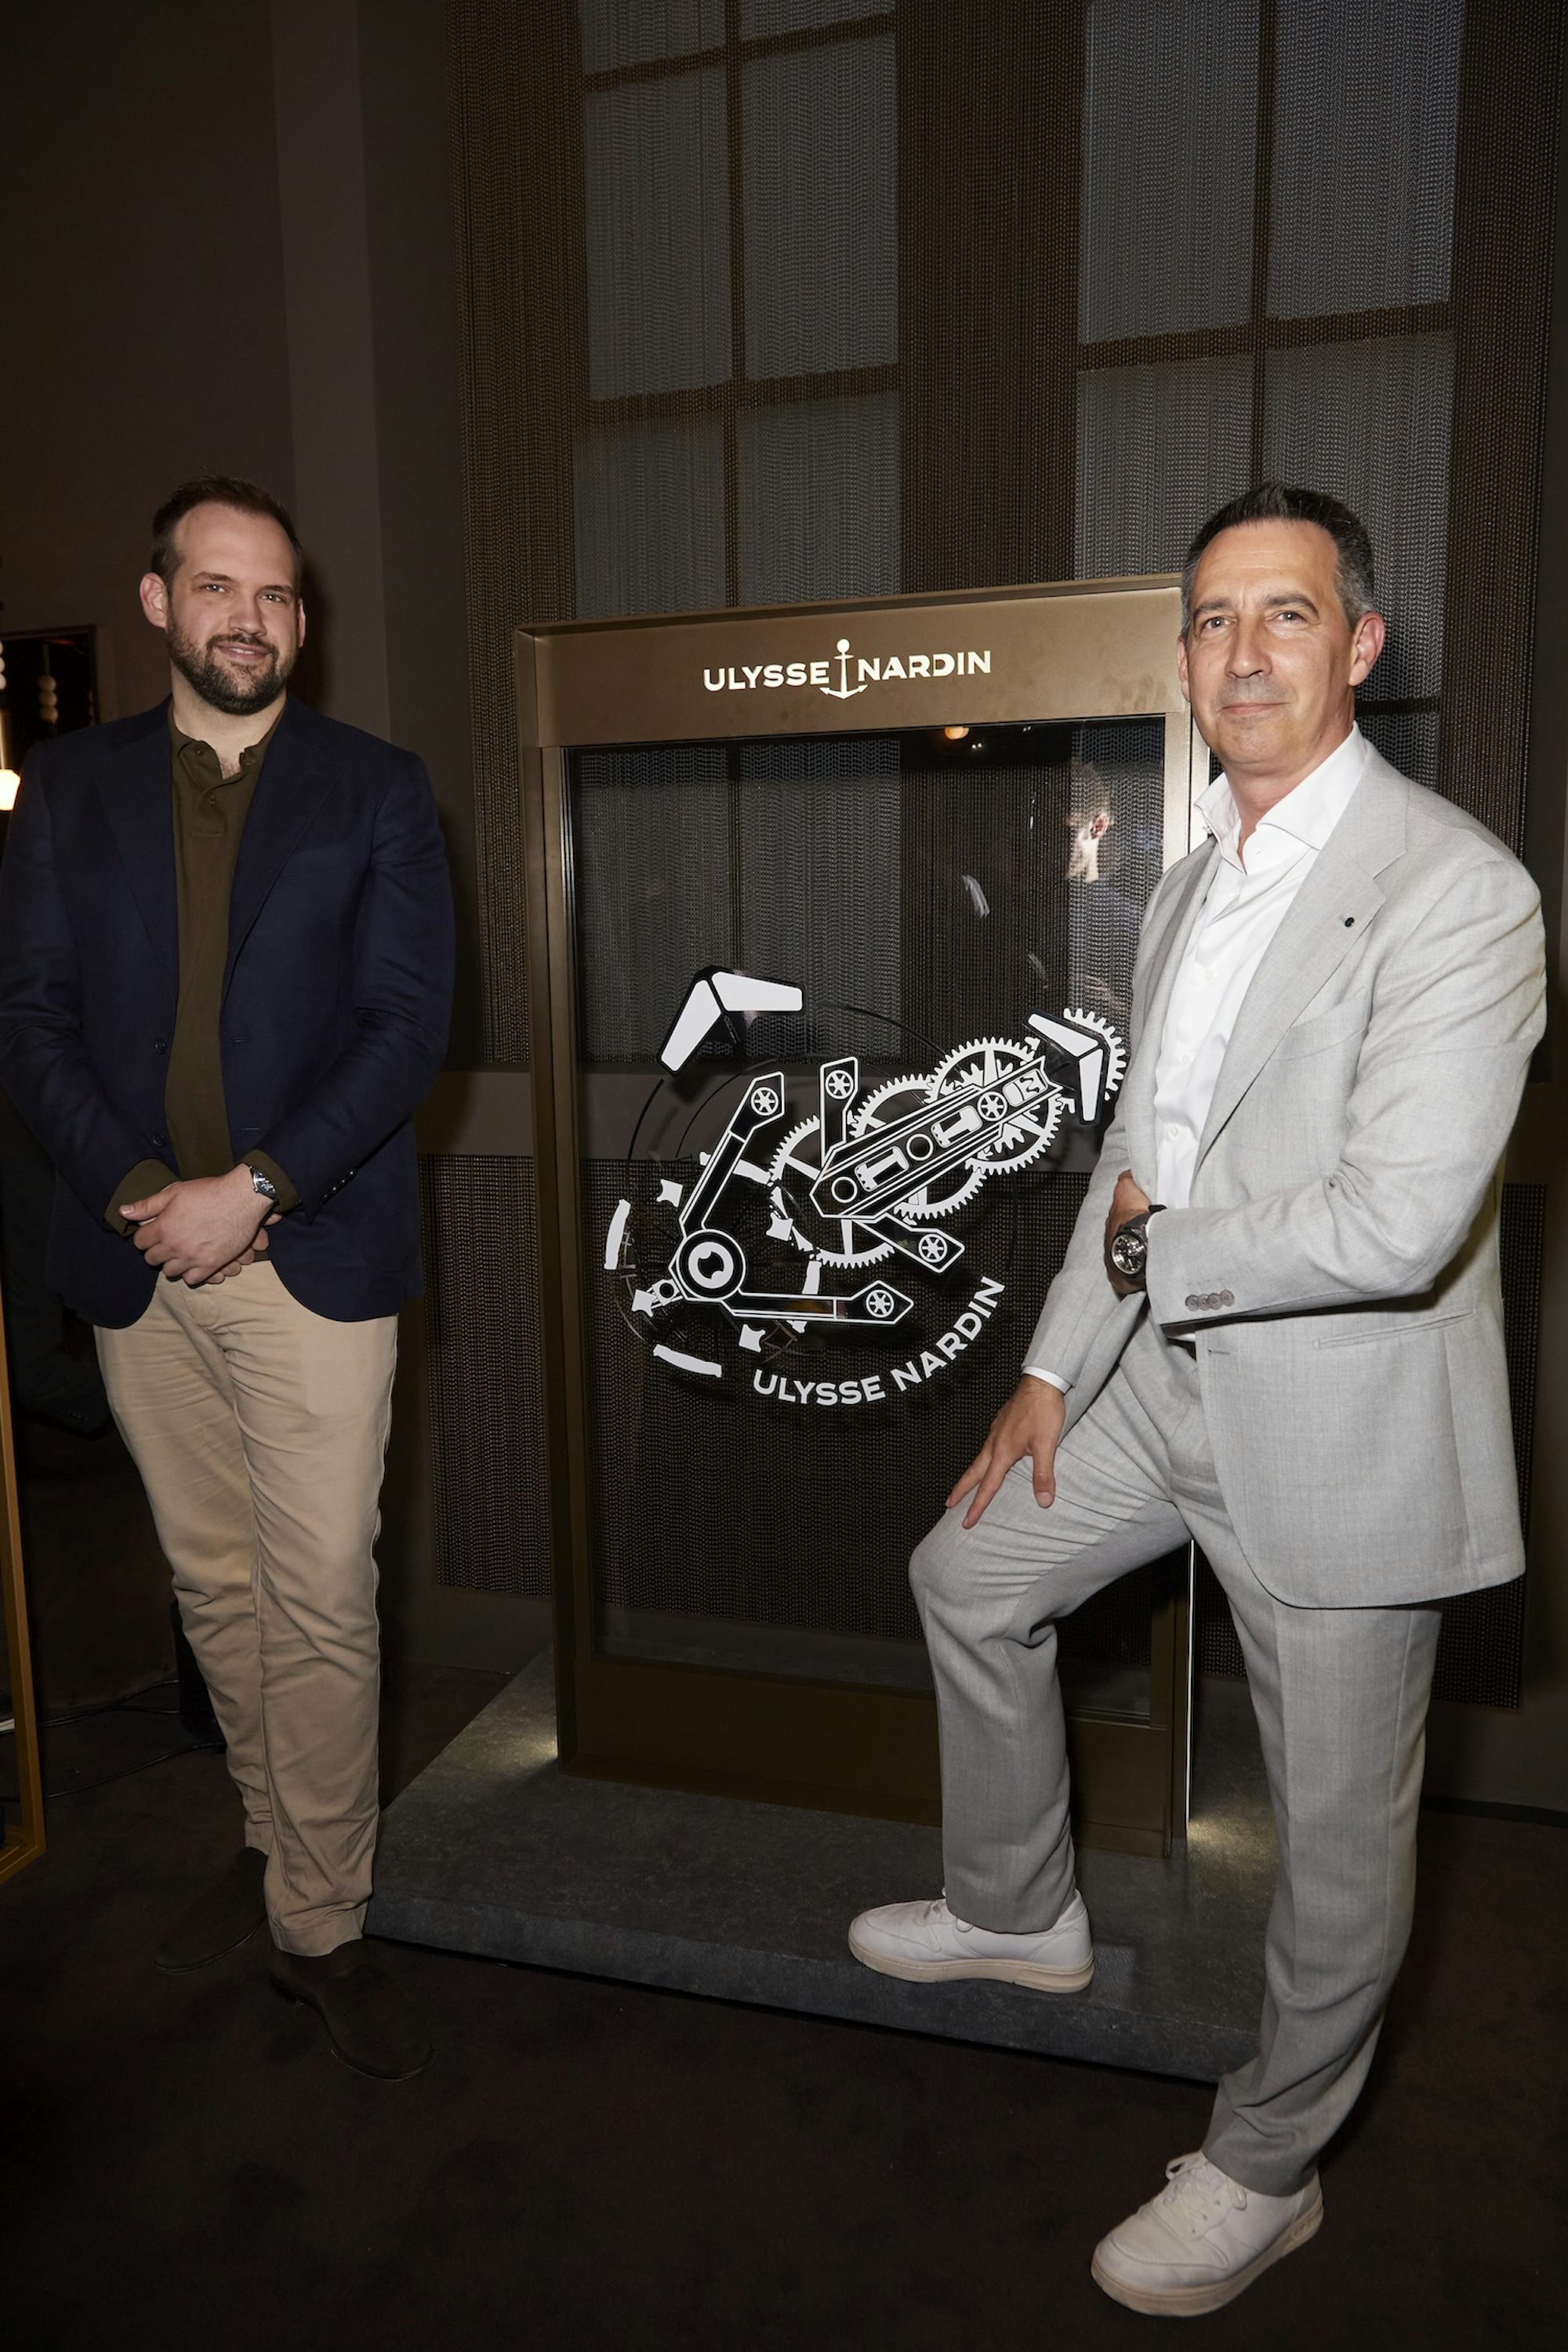 Mark Kauzlarich and FX standing in front of a Ulysse Nardin sign